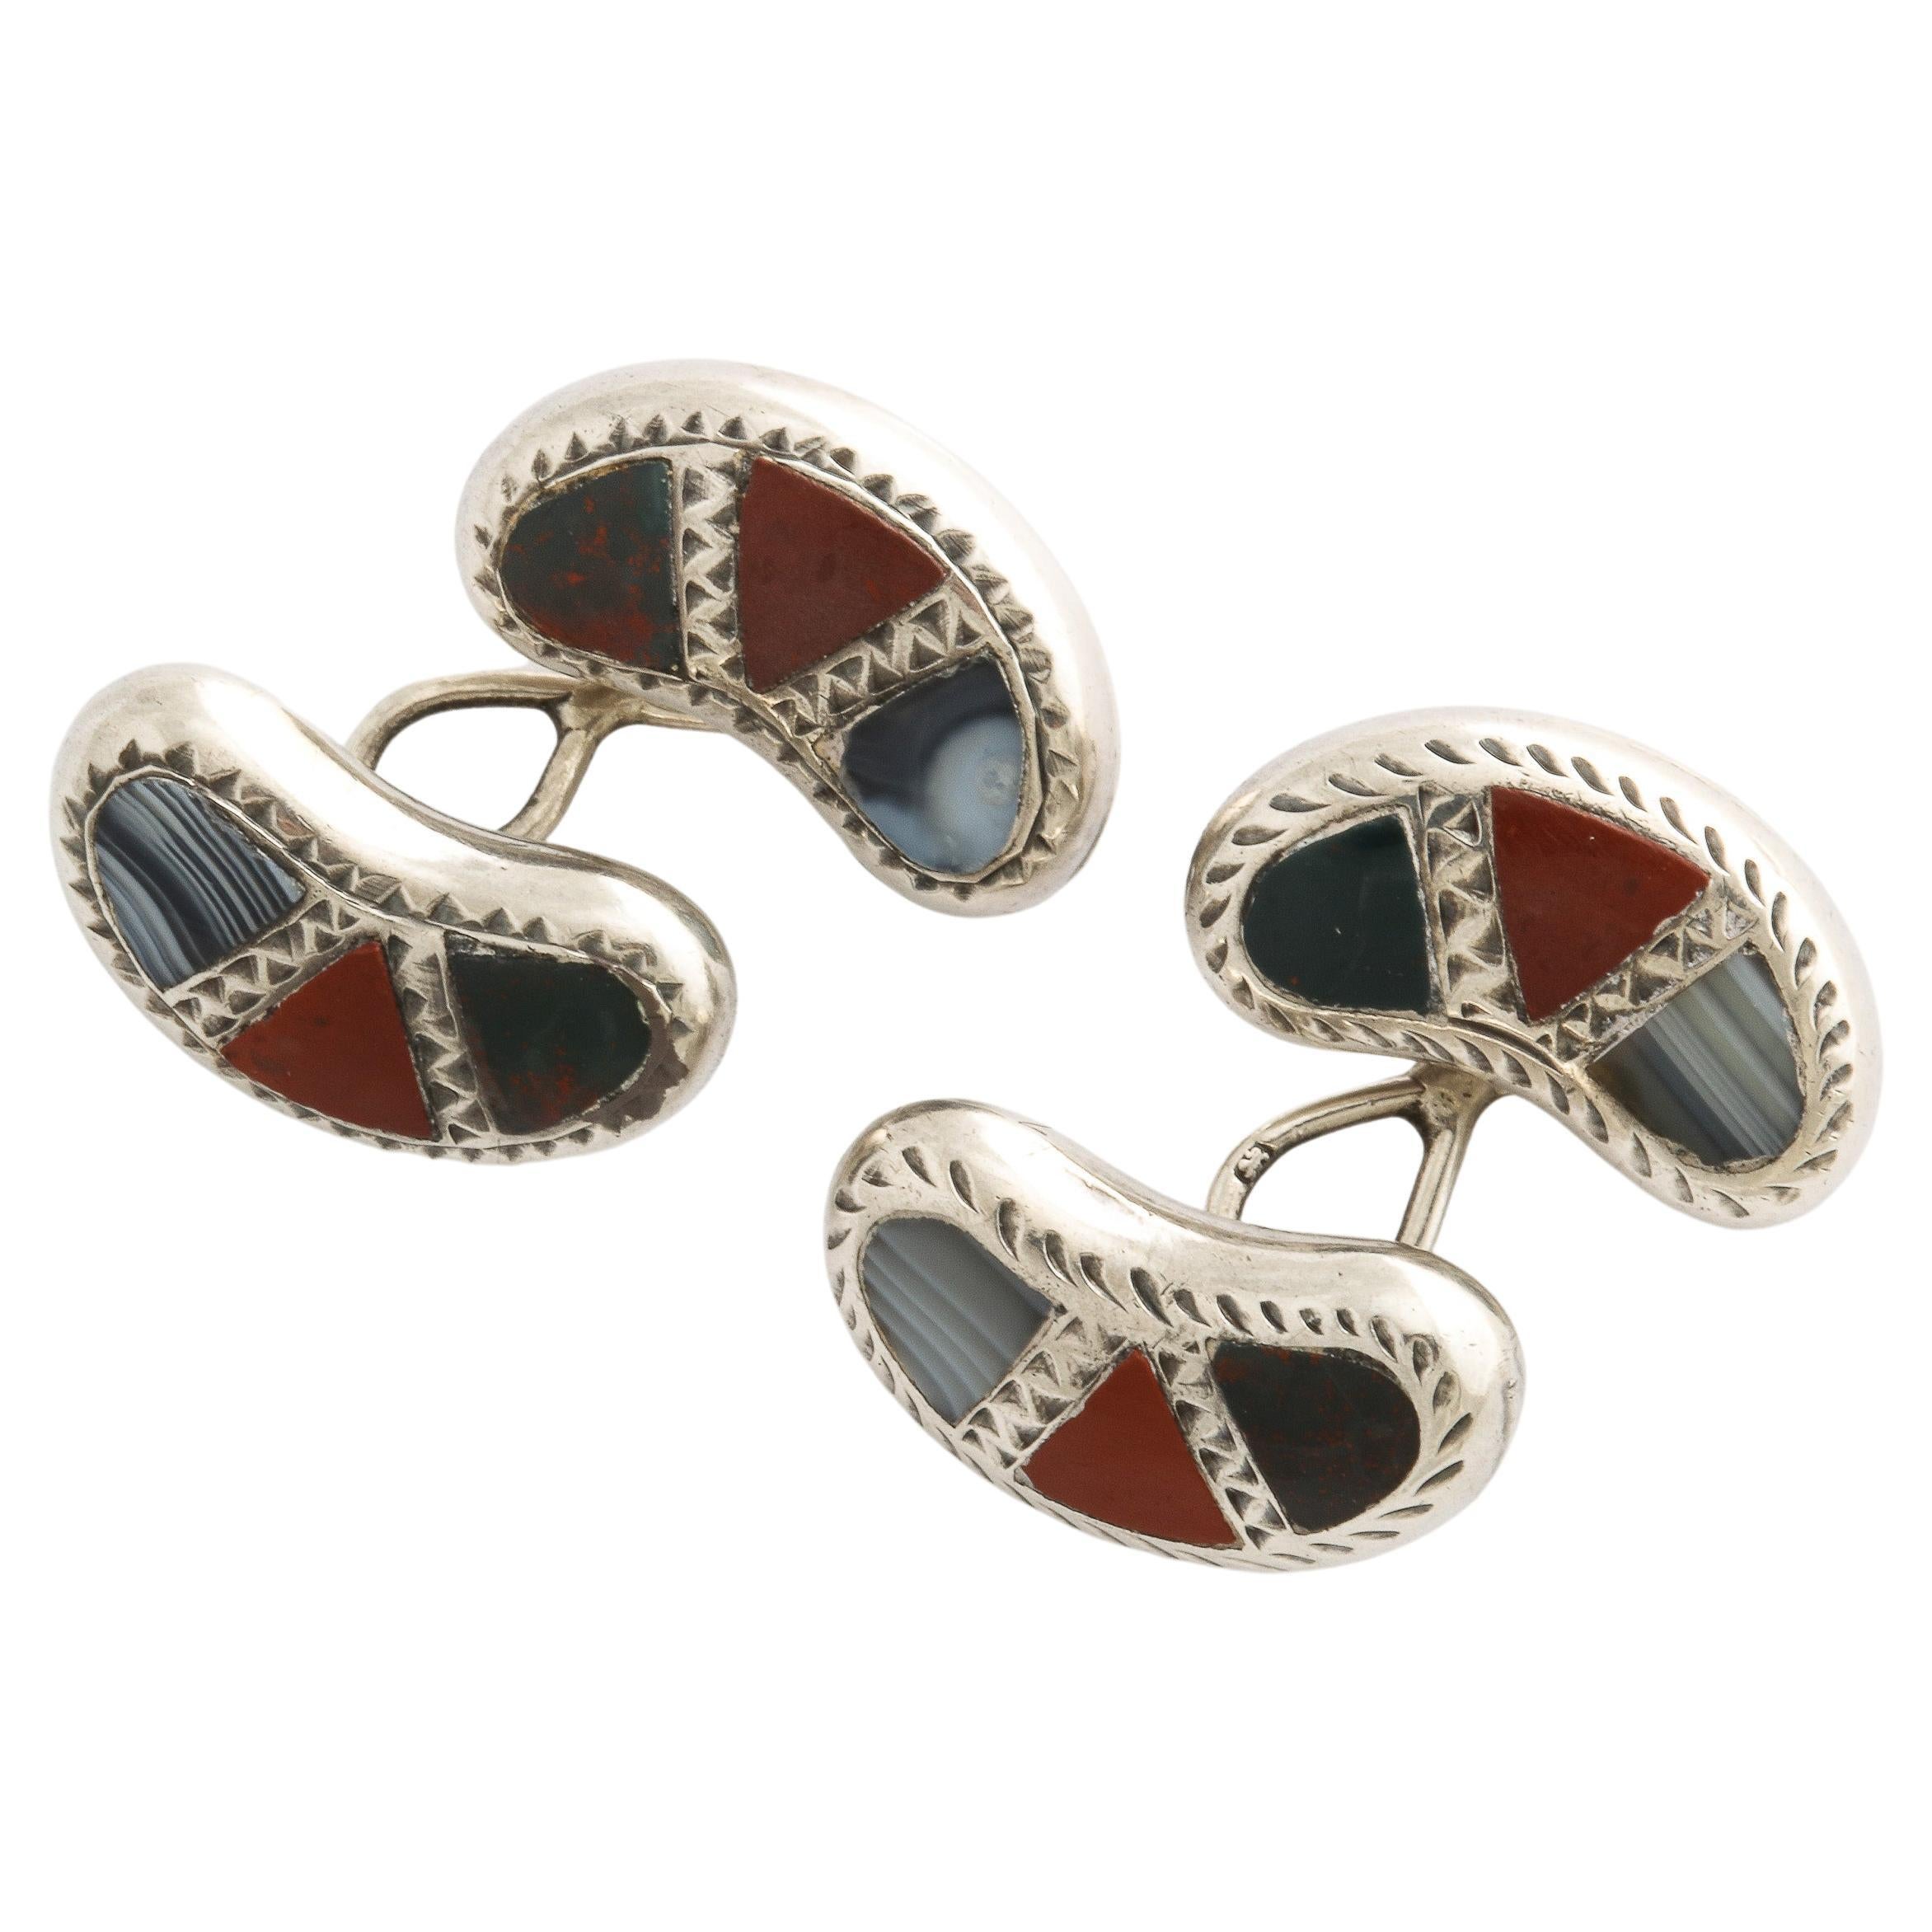 Edwardian Pair of Kidney-Shaped Scottish Agate and Sterling Silver Cuff Links For Sale